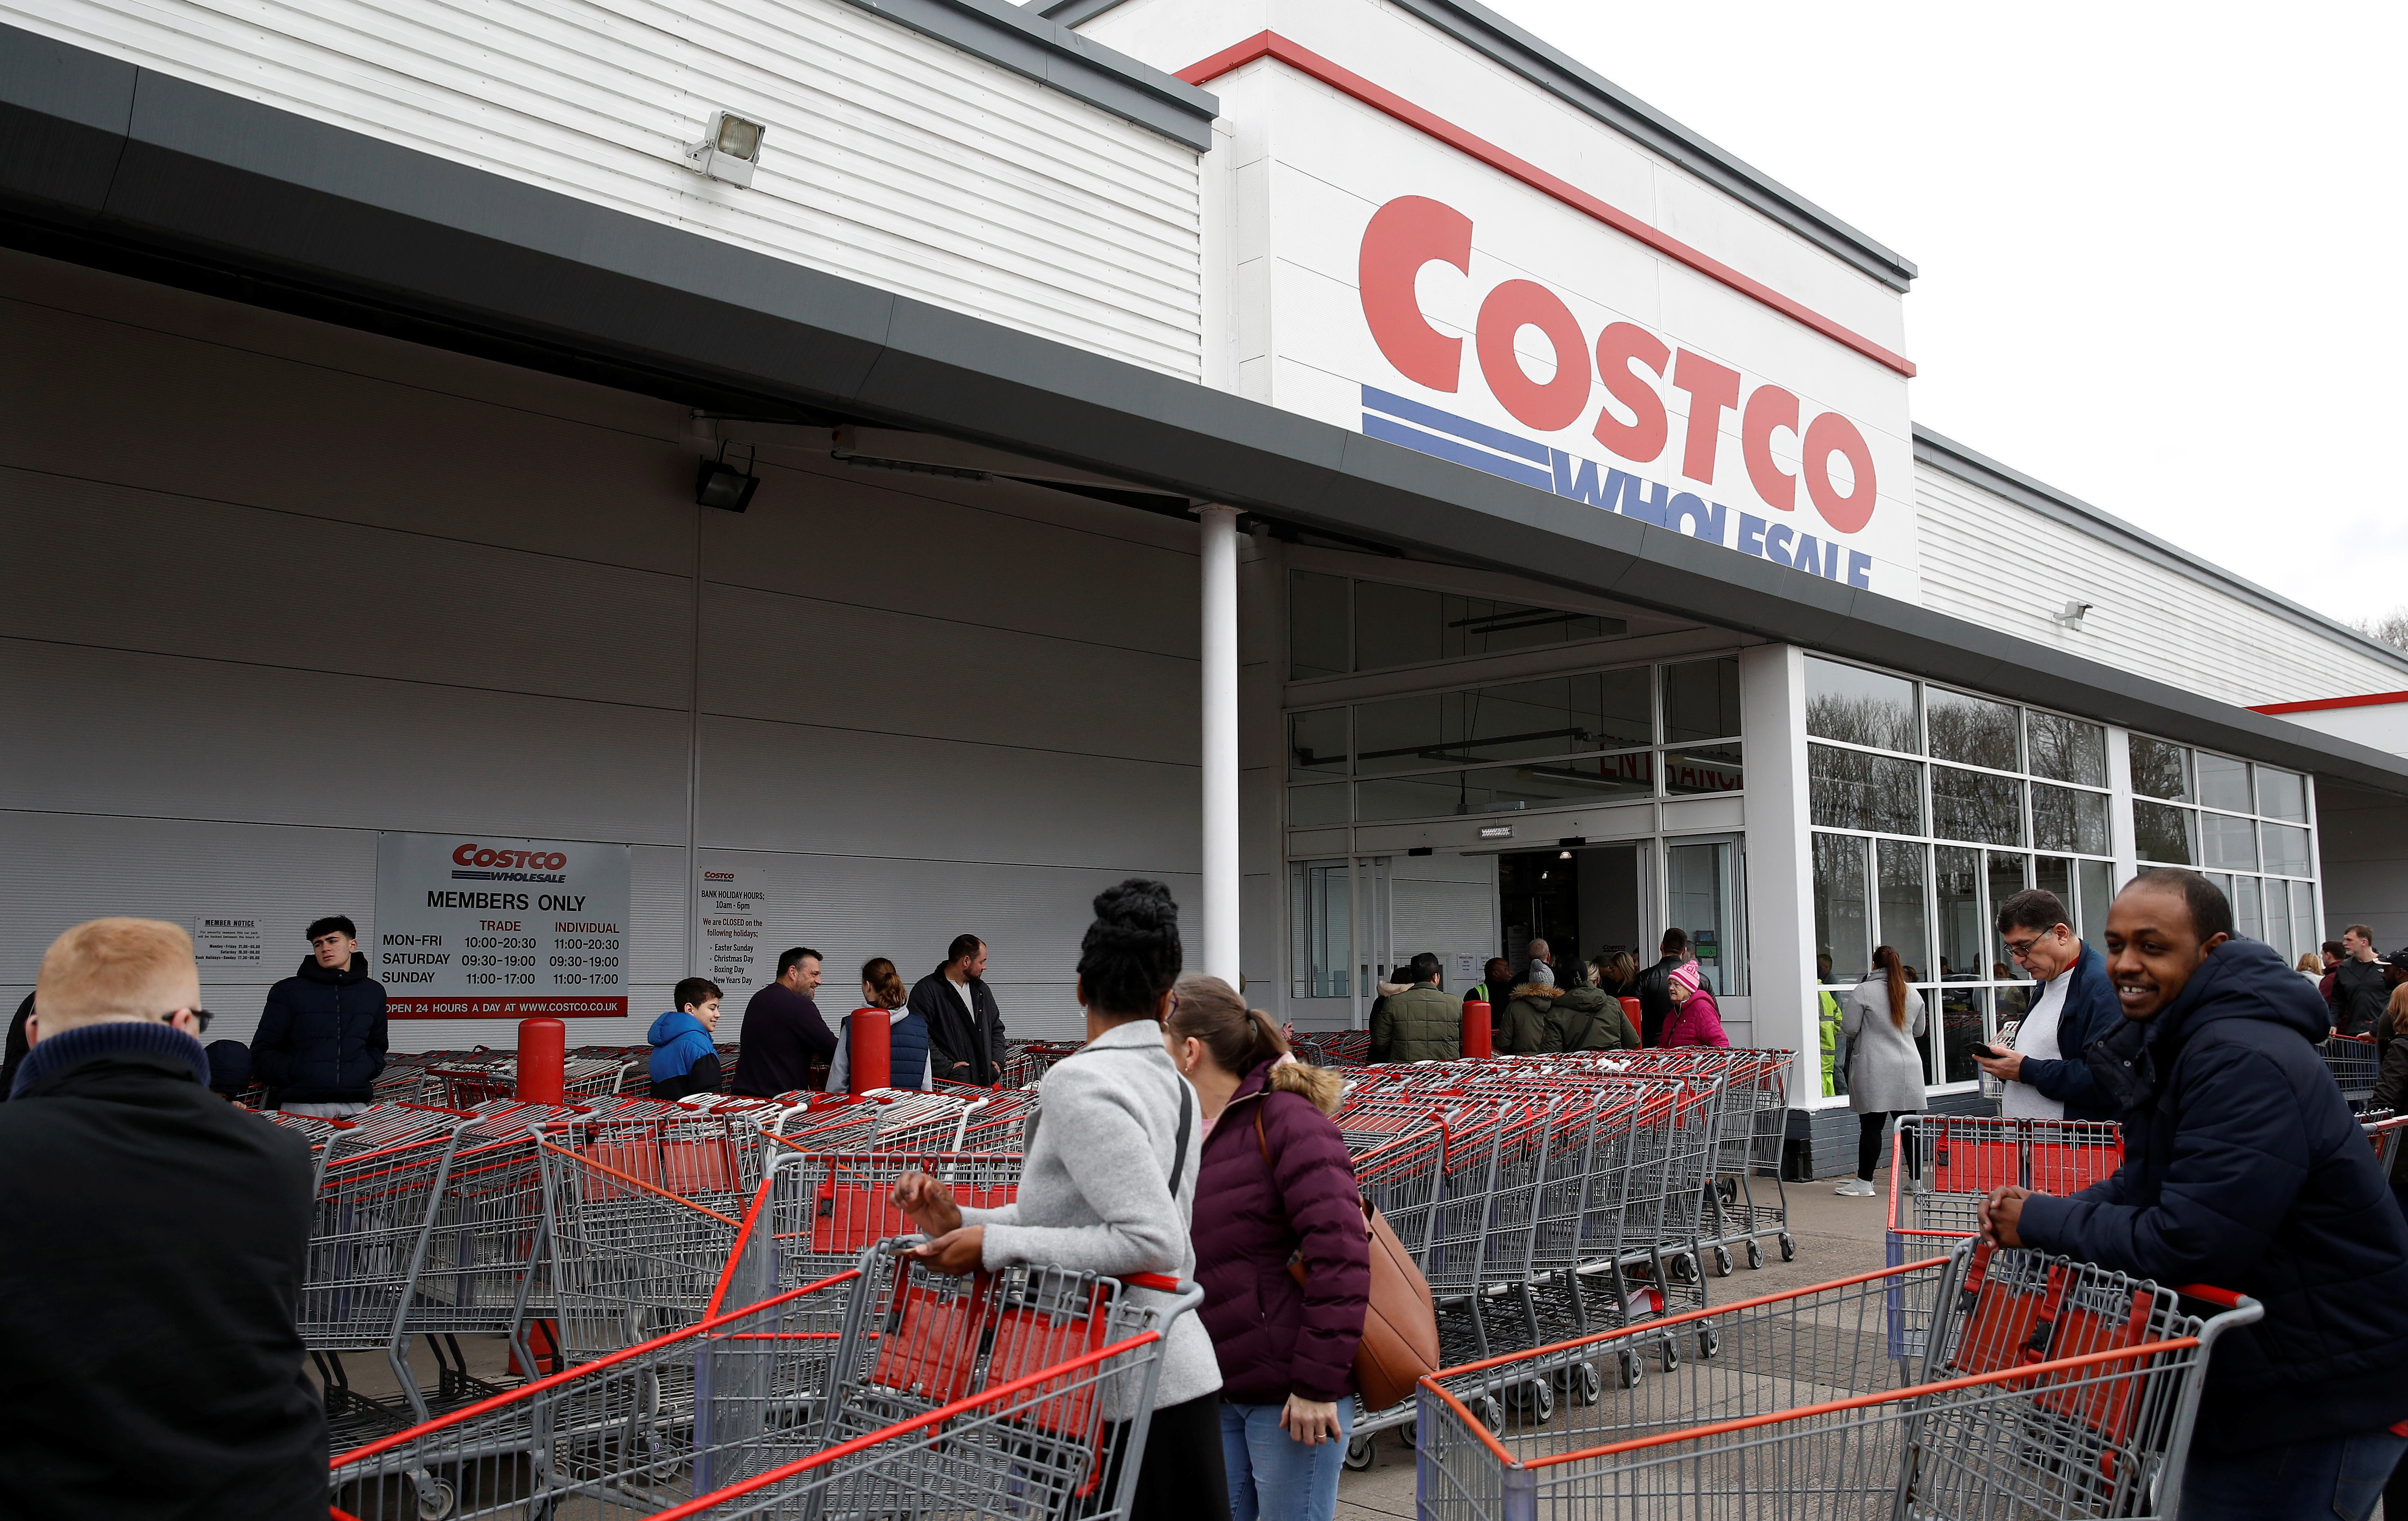 People form a long queue as they wait for the Costco wholesalers to open in Manchester, Britain